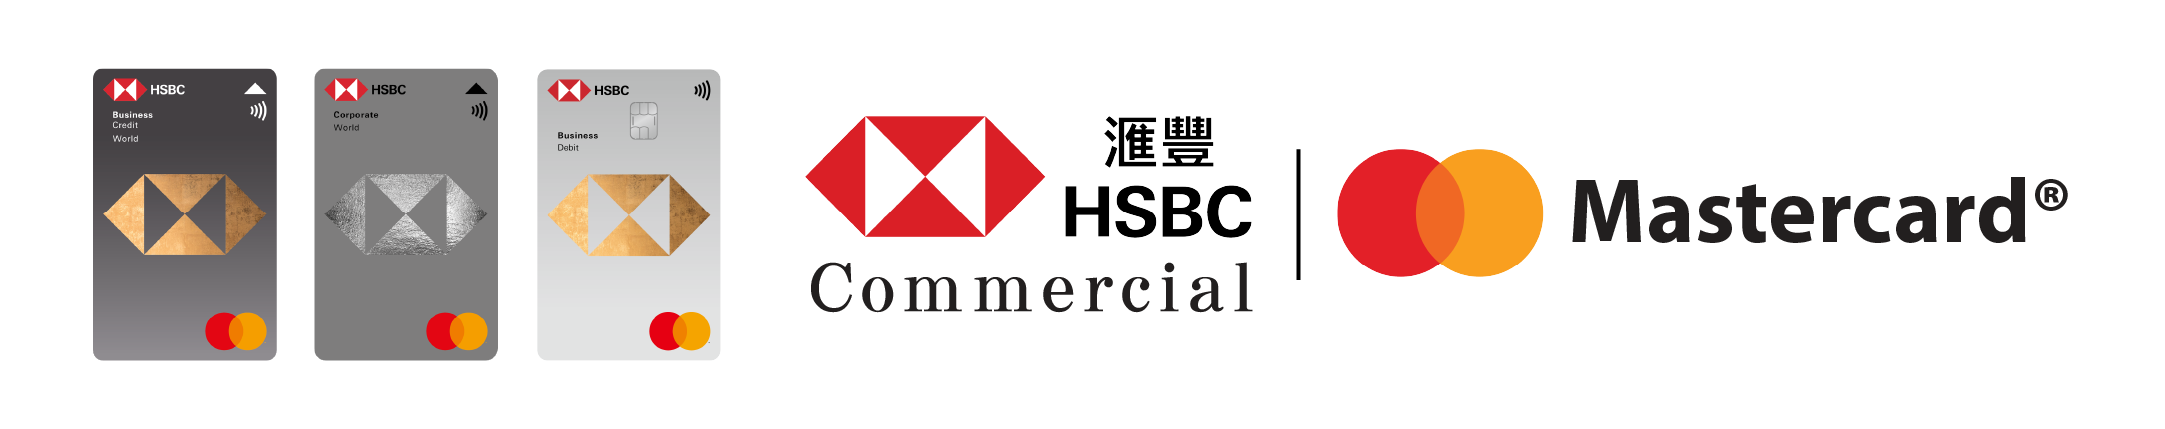 HSBC Commercial Mastercard